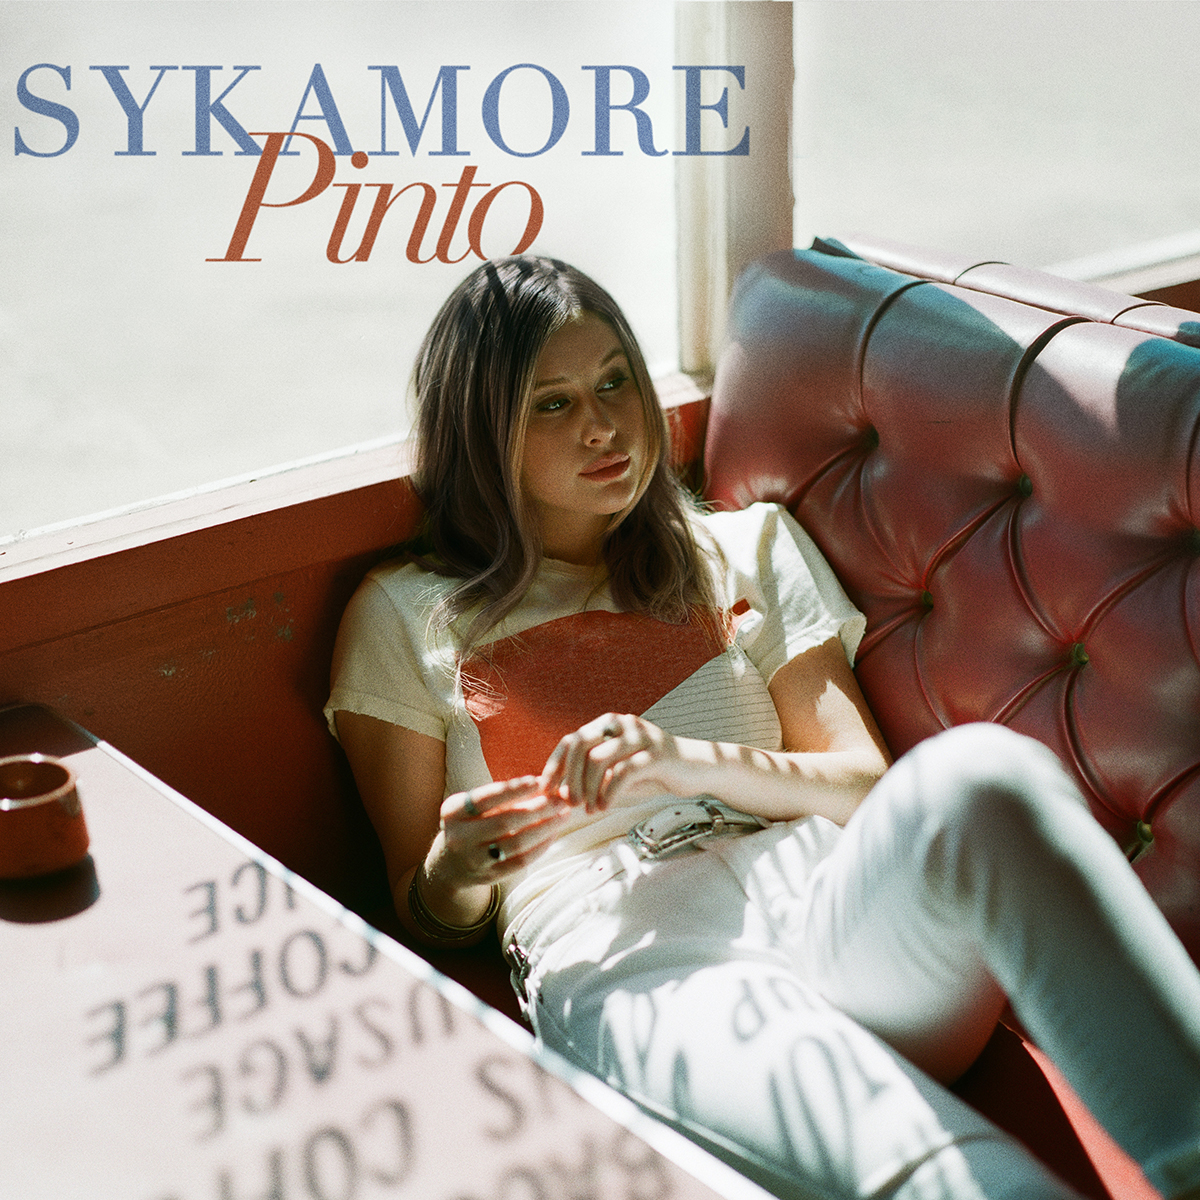 Sykamore’s ‘Pinto’ Fires On all Cylinders By Roman Mitz